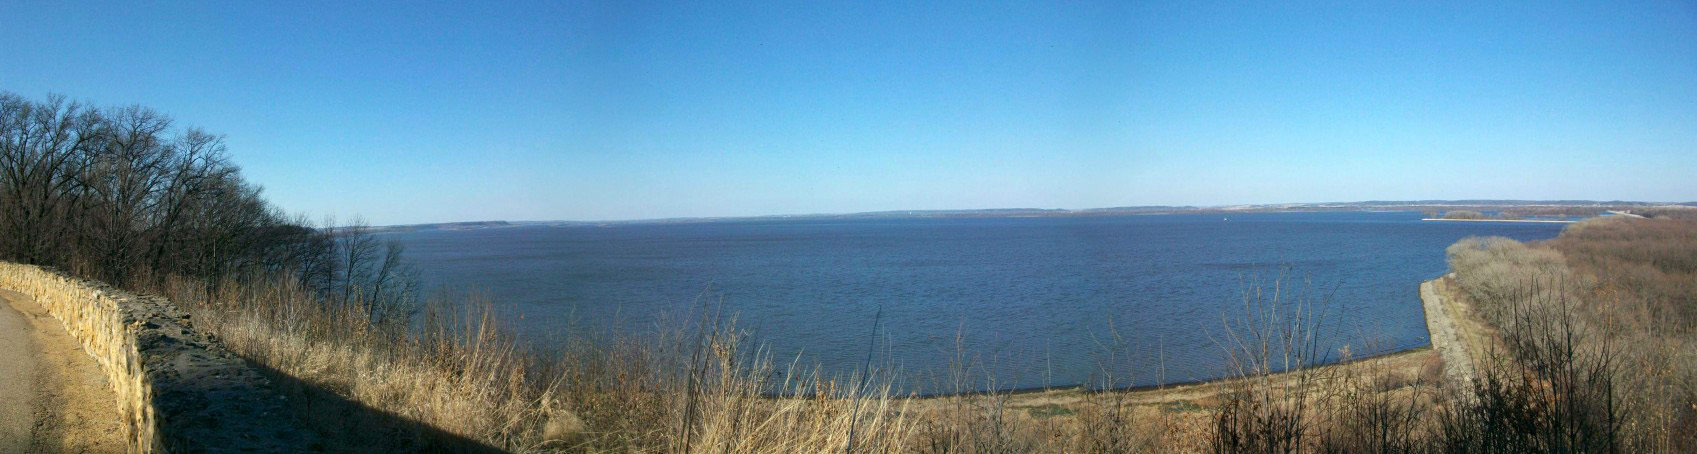 View of the Mississippi River from Clinton, Iowa free photo. 